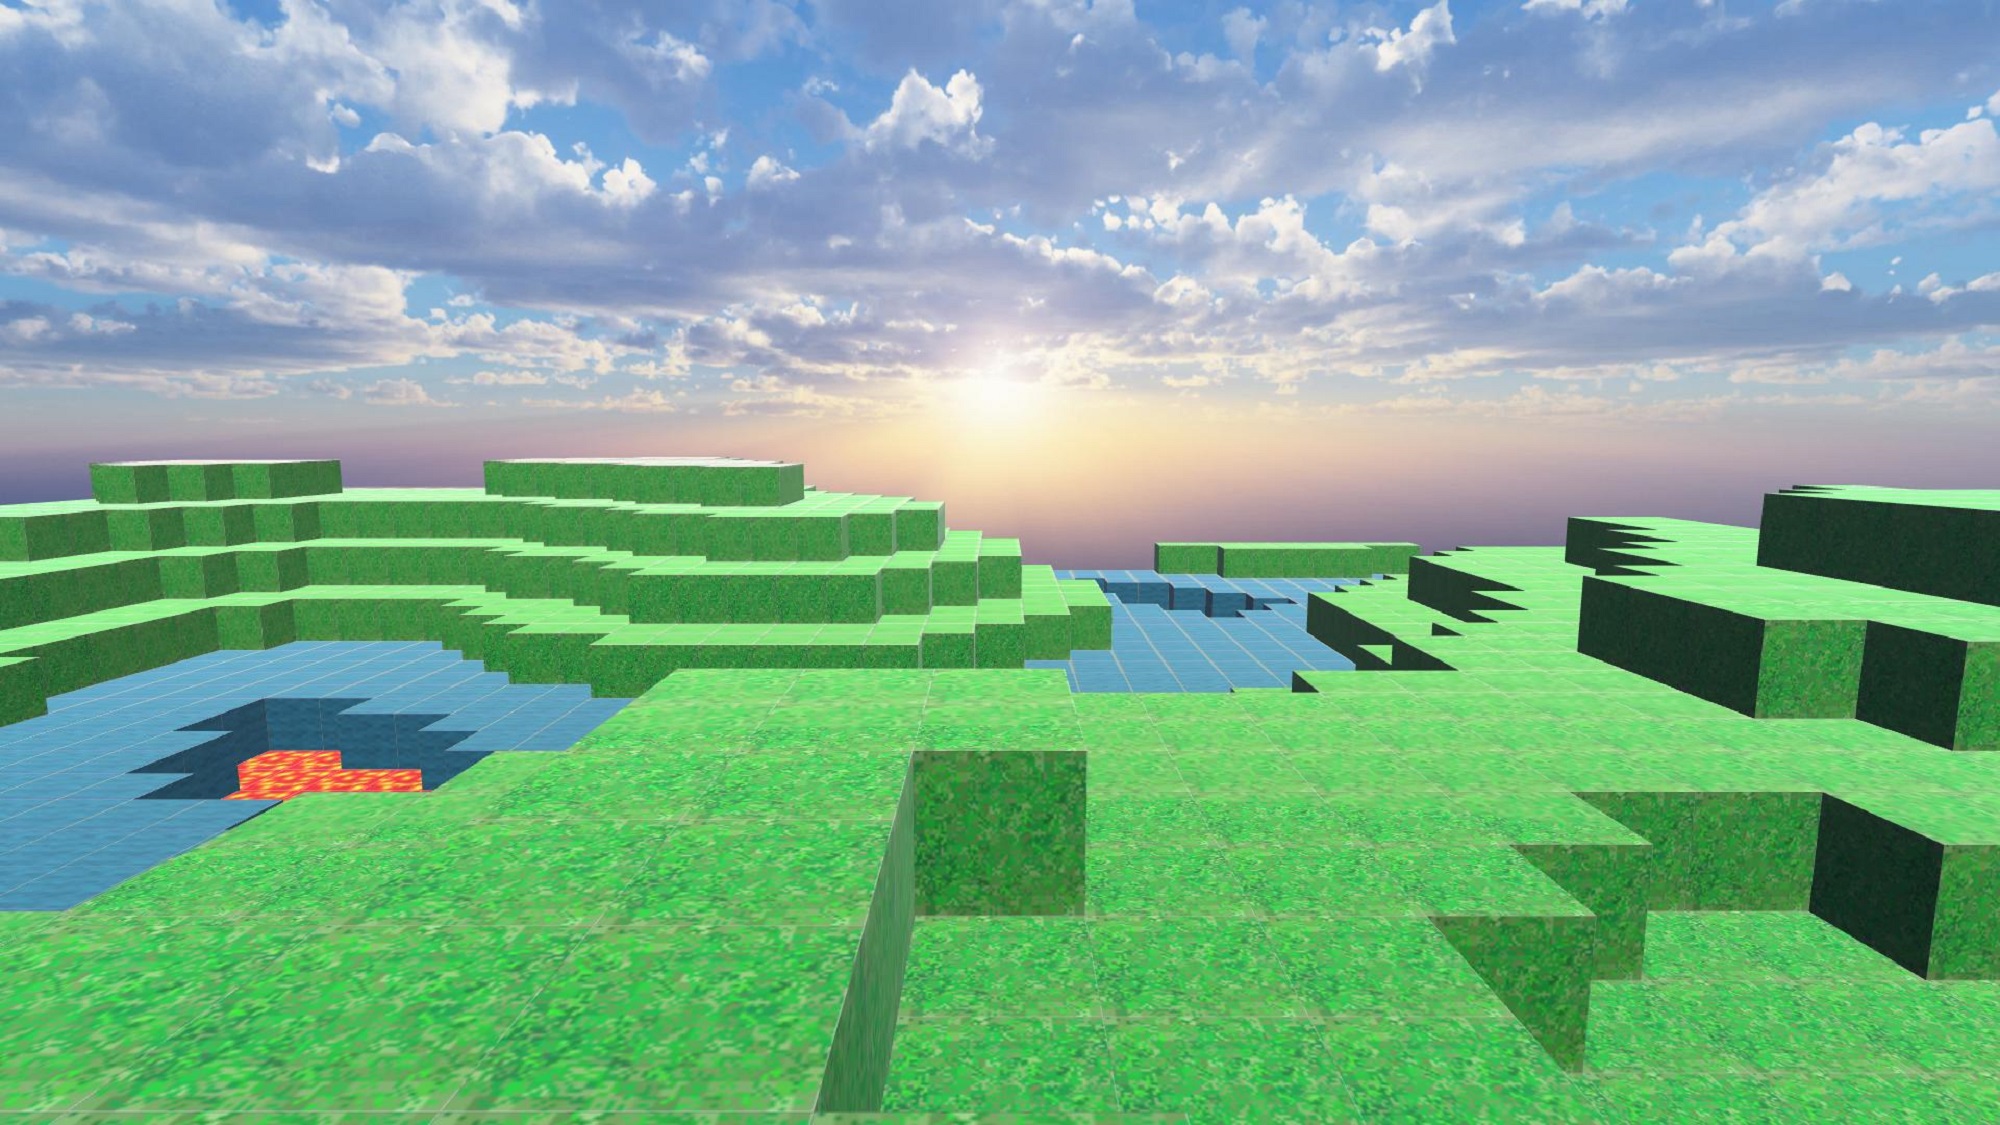 Creating a Minecraft-like landscape and uploading to STYLY -part 2 of 2-